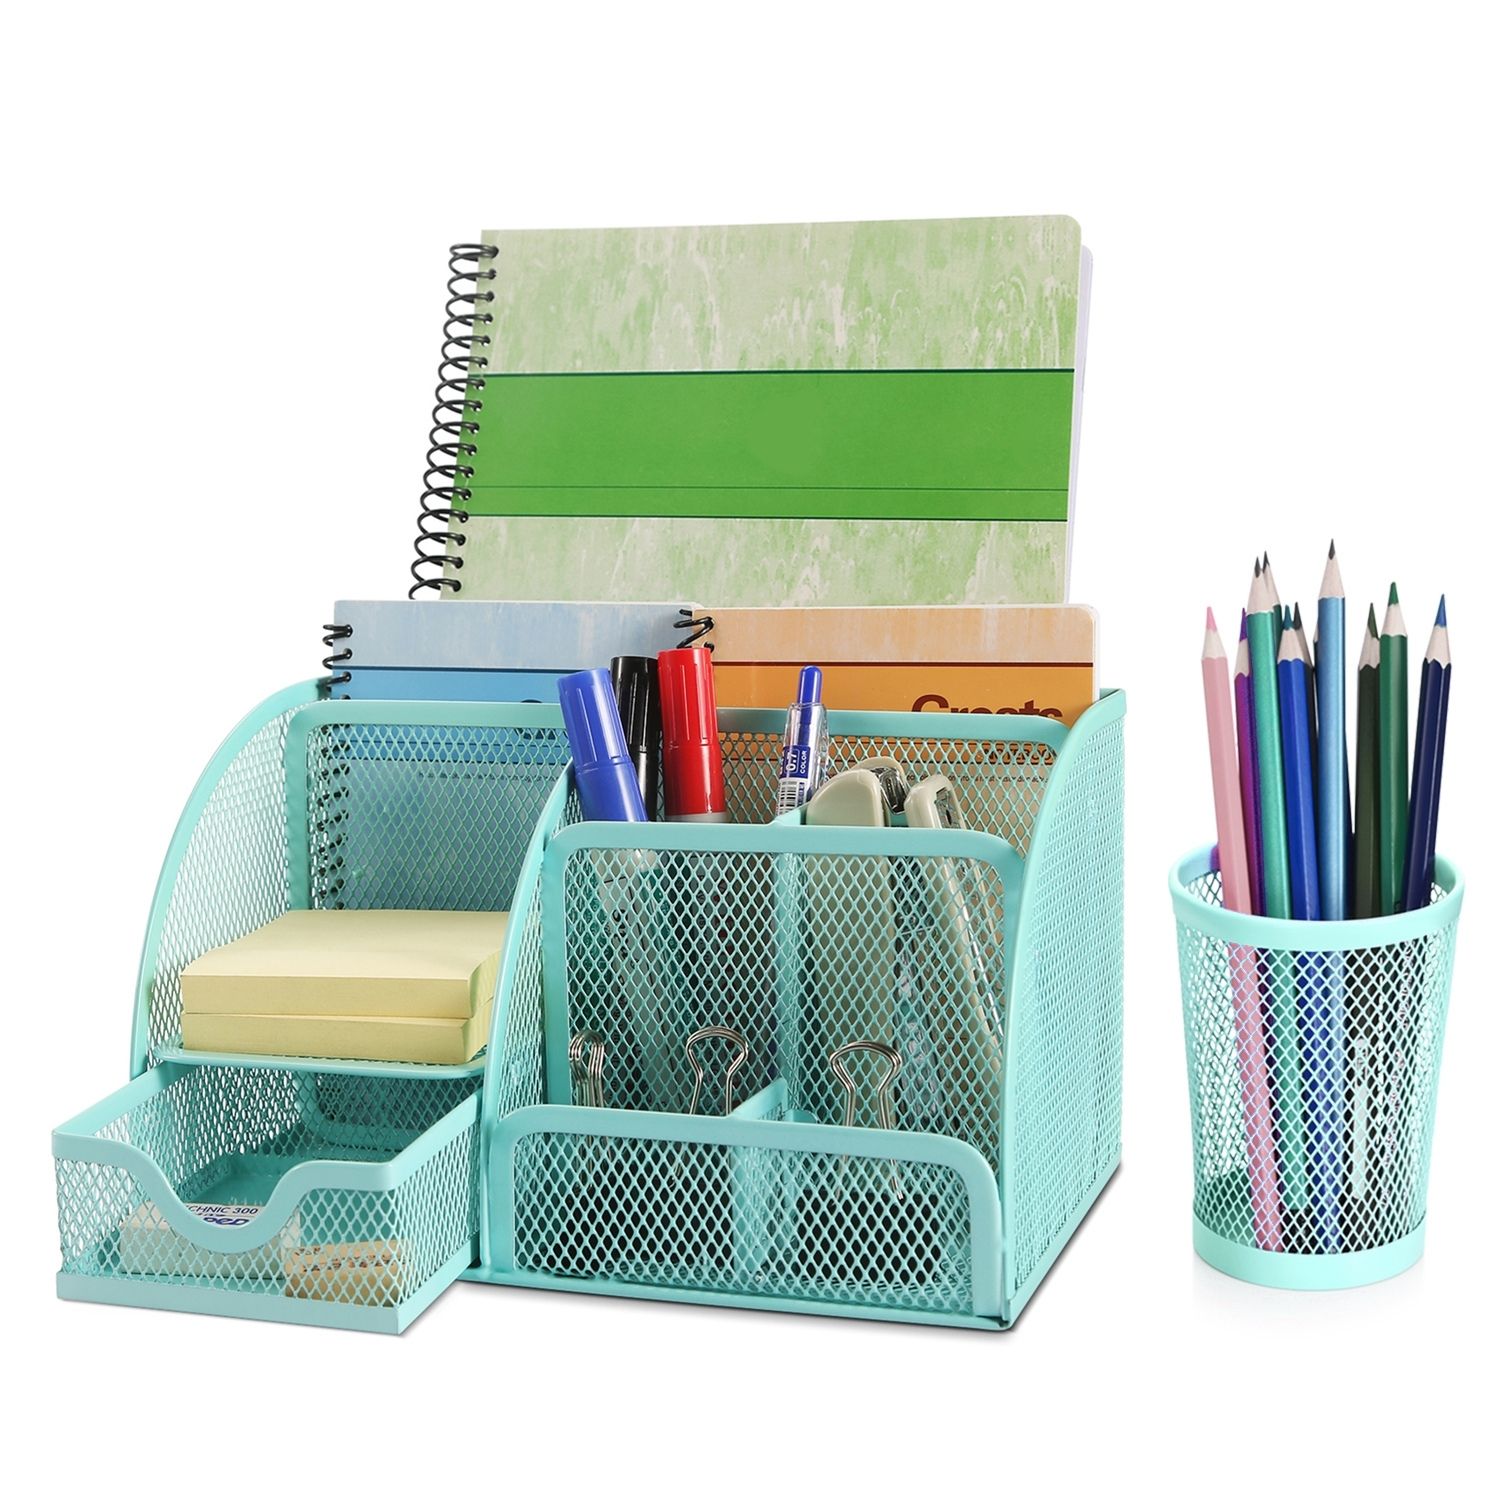 Desk Organizer Office Supplies Accessories Desktop Tabletop Sorter Shelf  Pencil Holder Caddy Set - Metal Mesh with Drawer and 6 Compartments  (Turquoise Aqua Blue) 